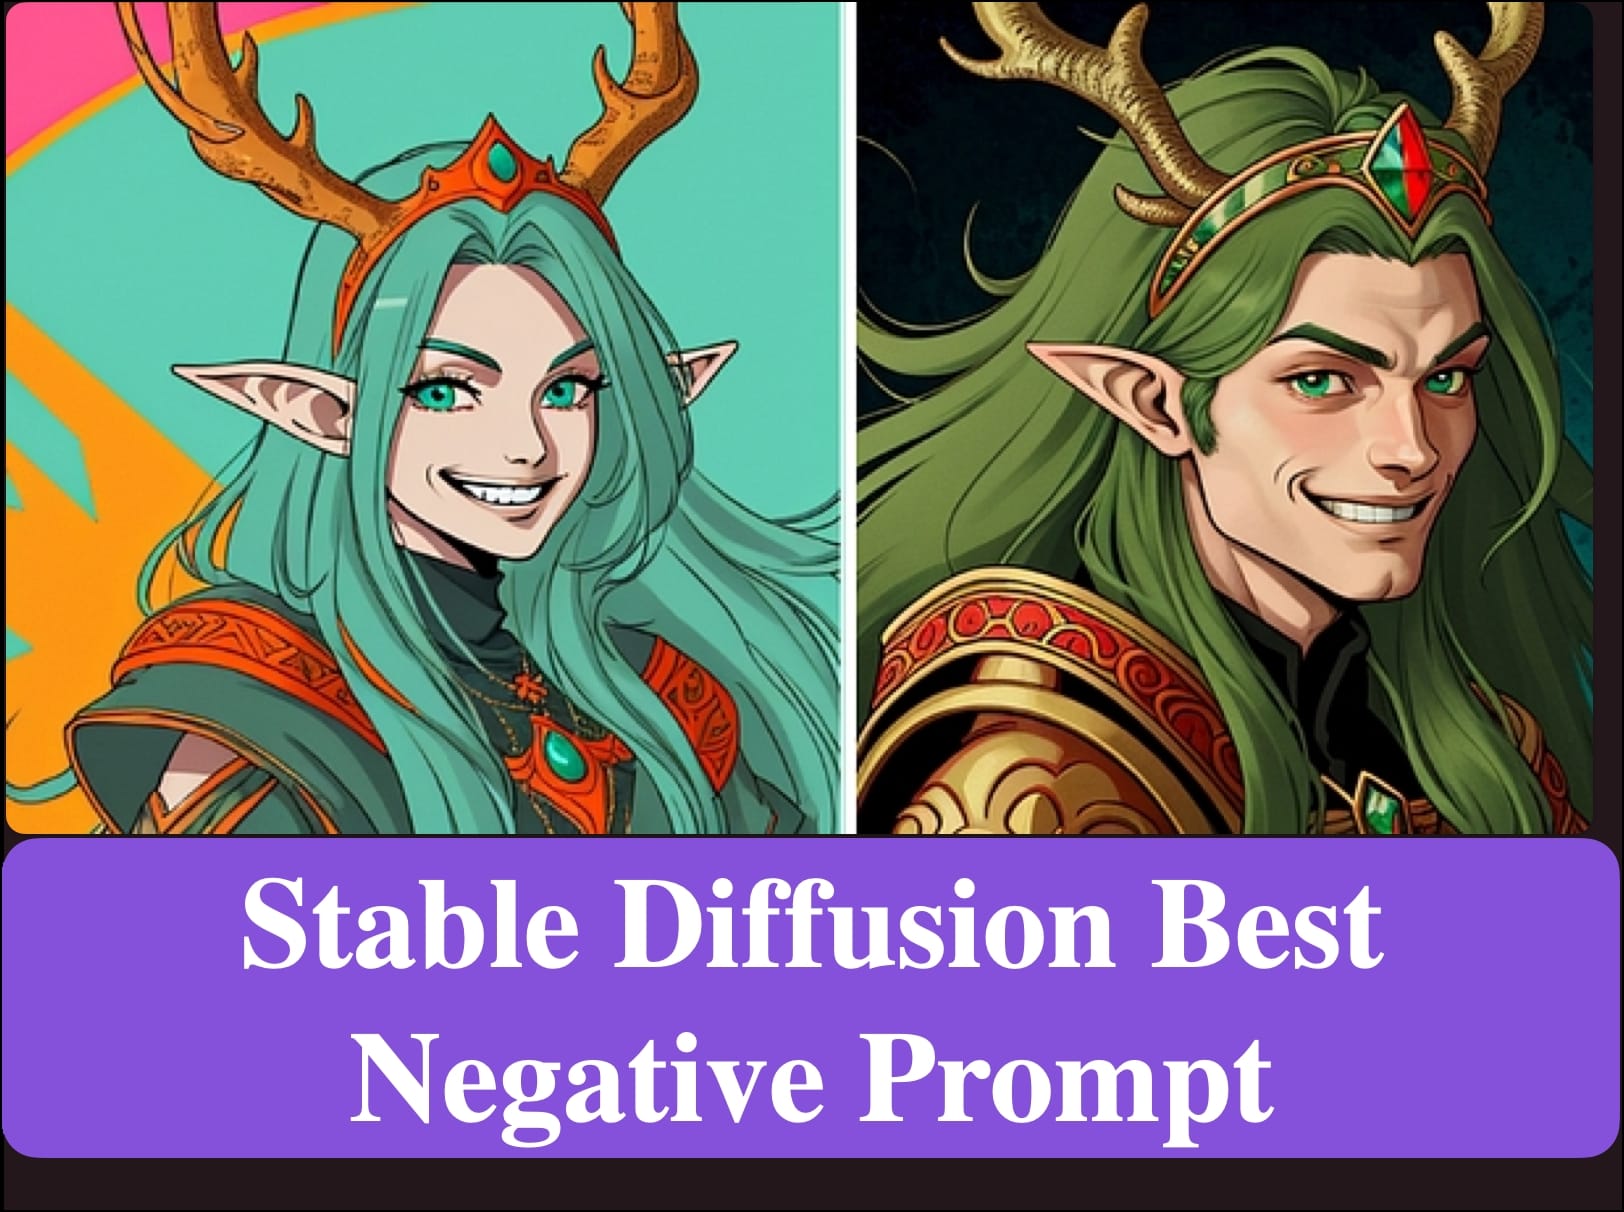 Best negative prompts for stable diffusion